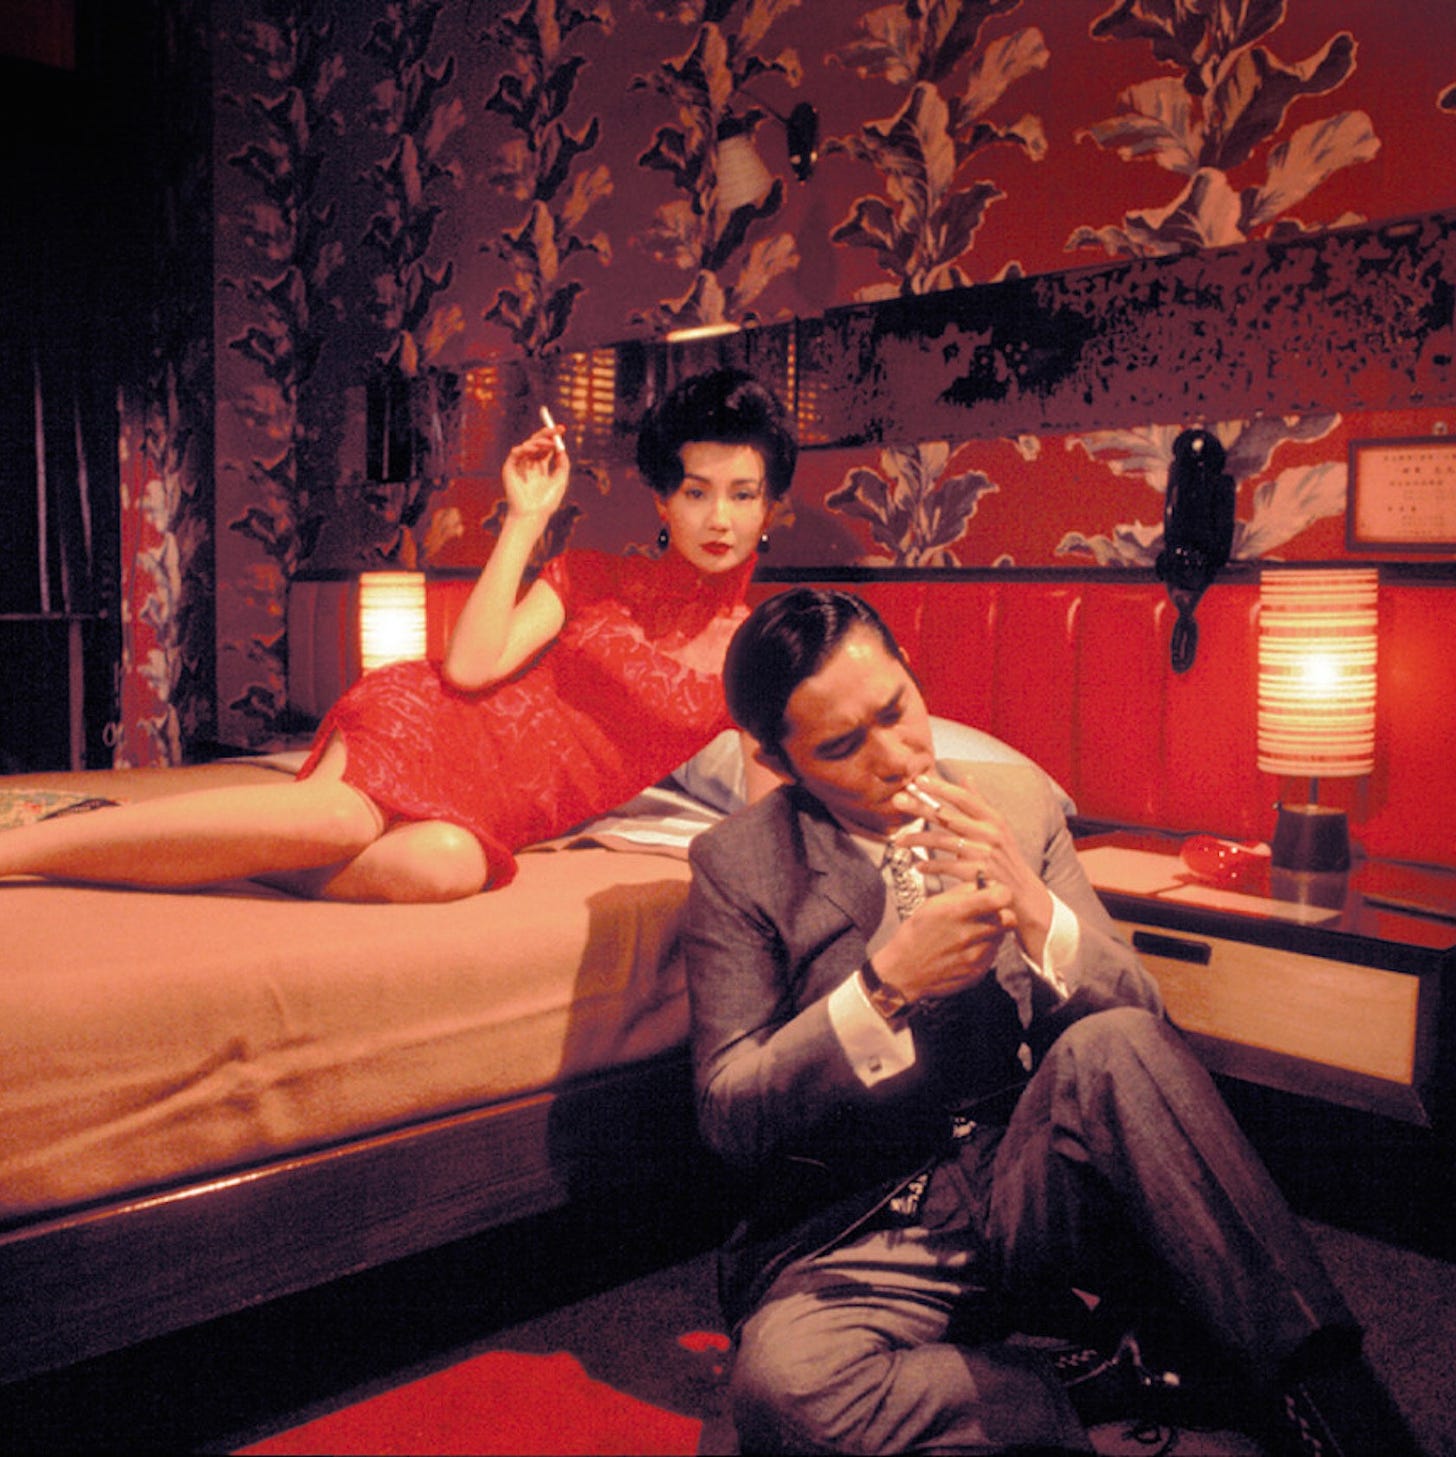 Celebrating 20 years of being In the Mood for Love